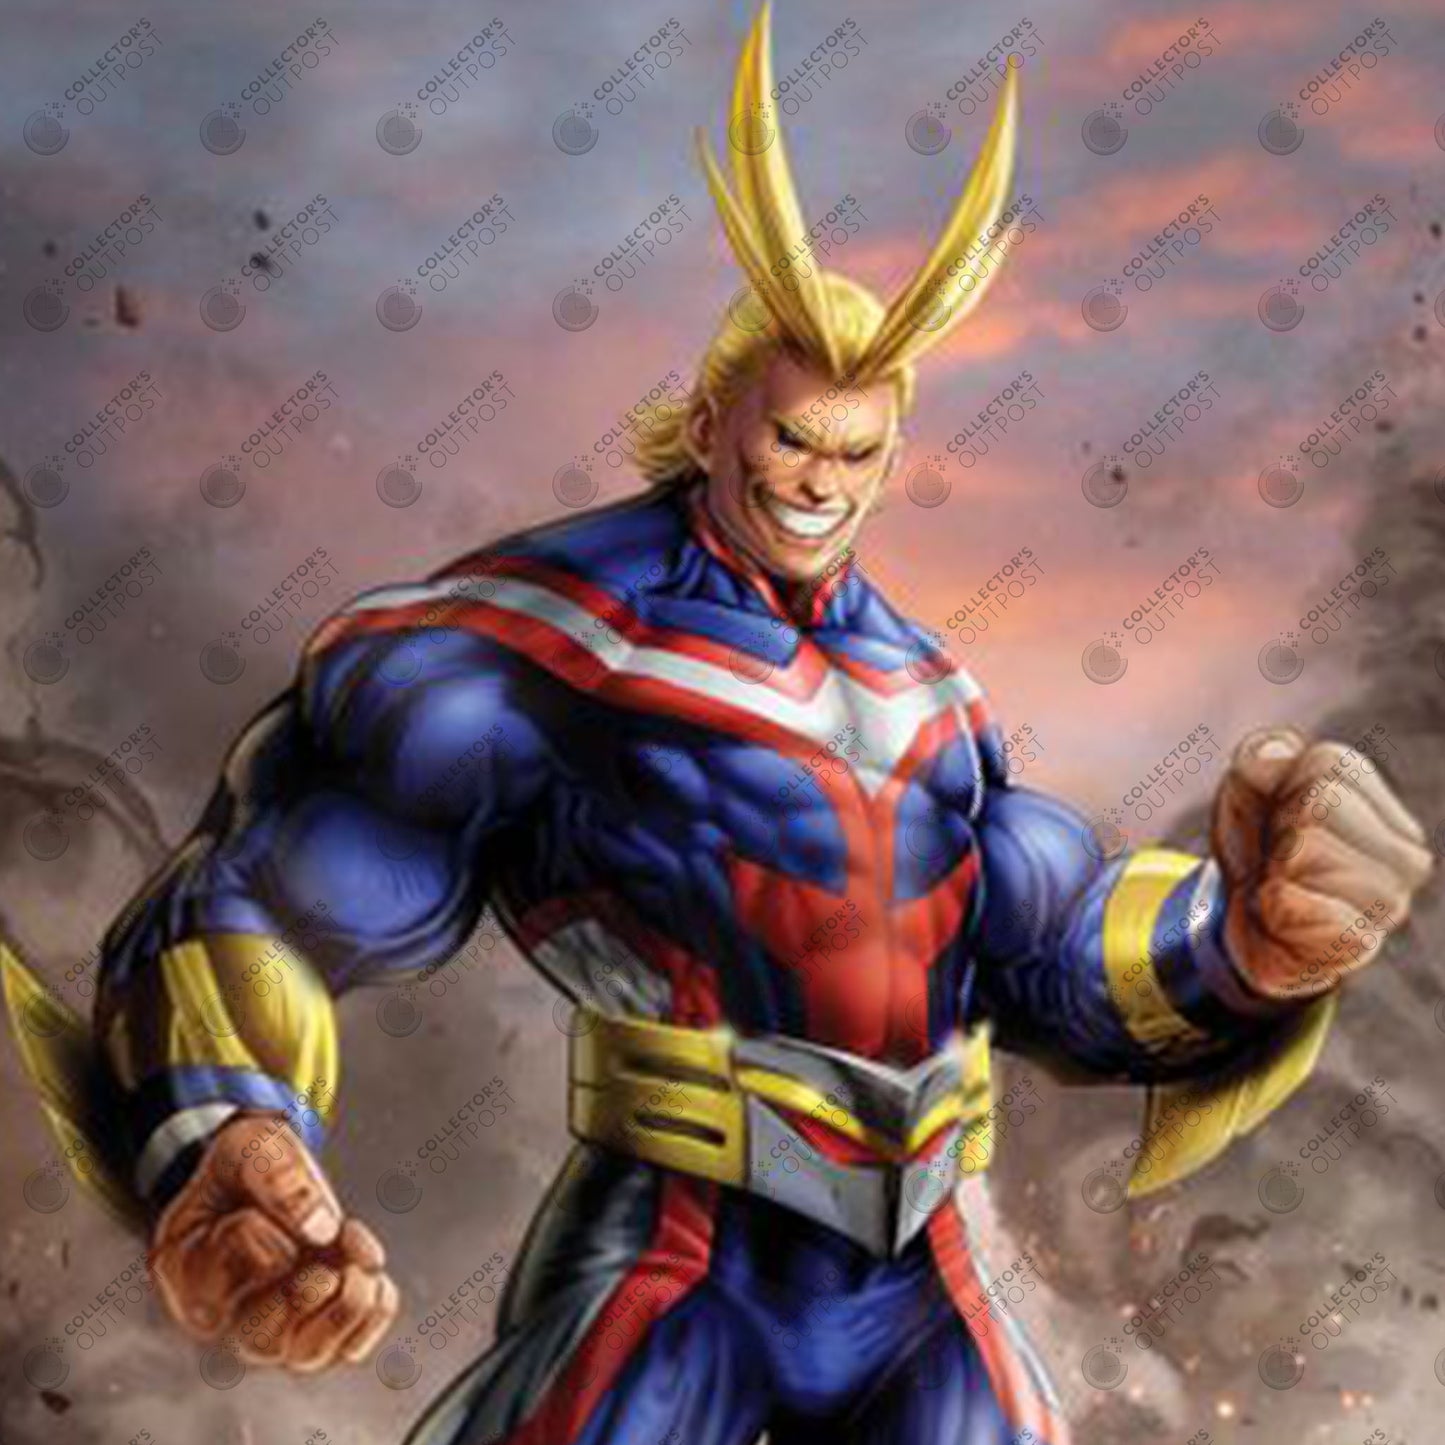 “I Am Here” All Might (My Hero Academia) Art Print By Dominic Glover